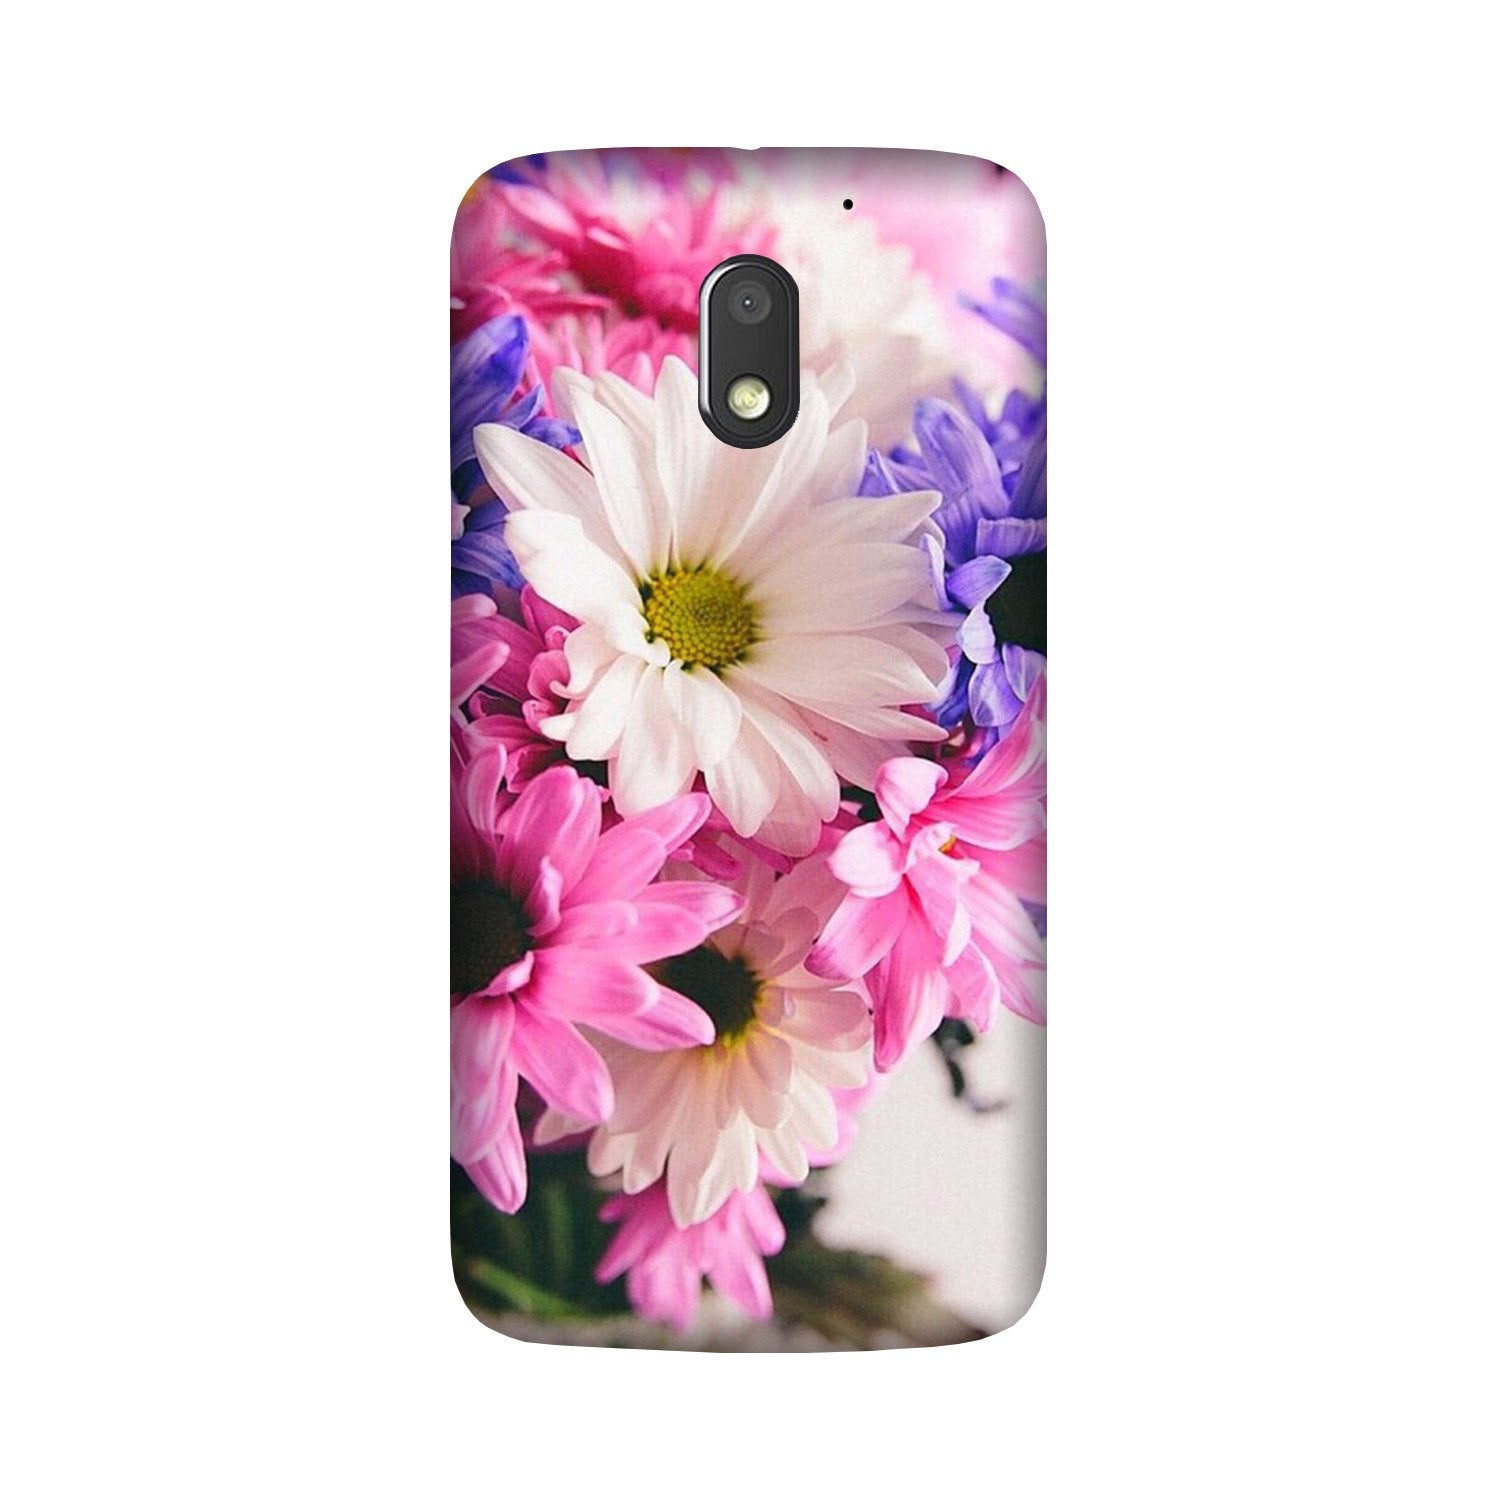 Coloful Daisy Case for Moto G4 Play